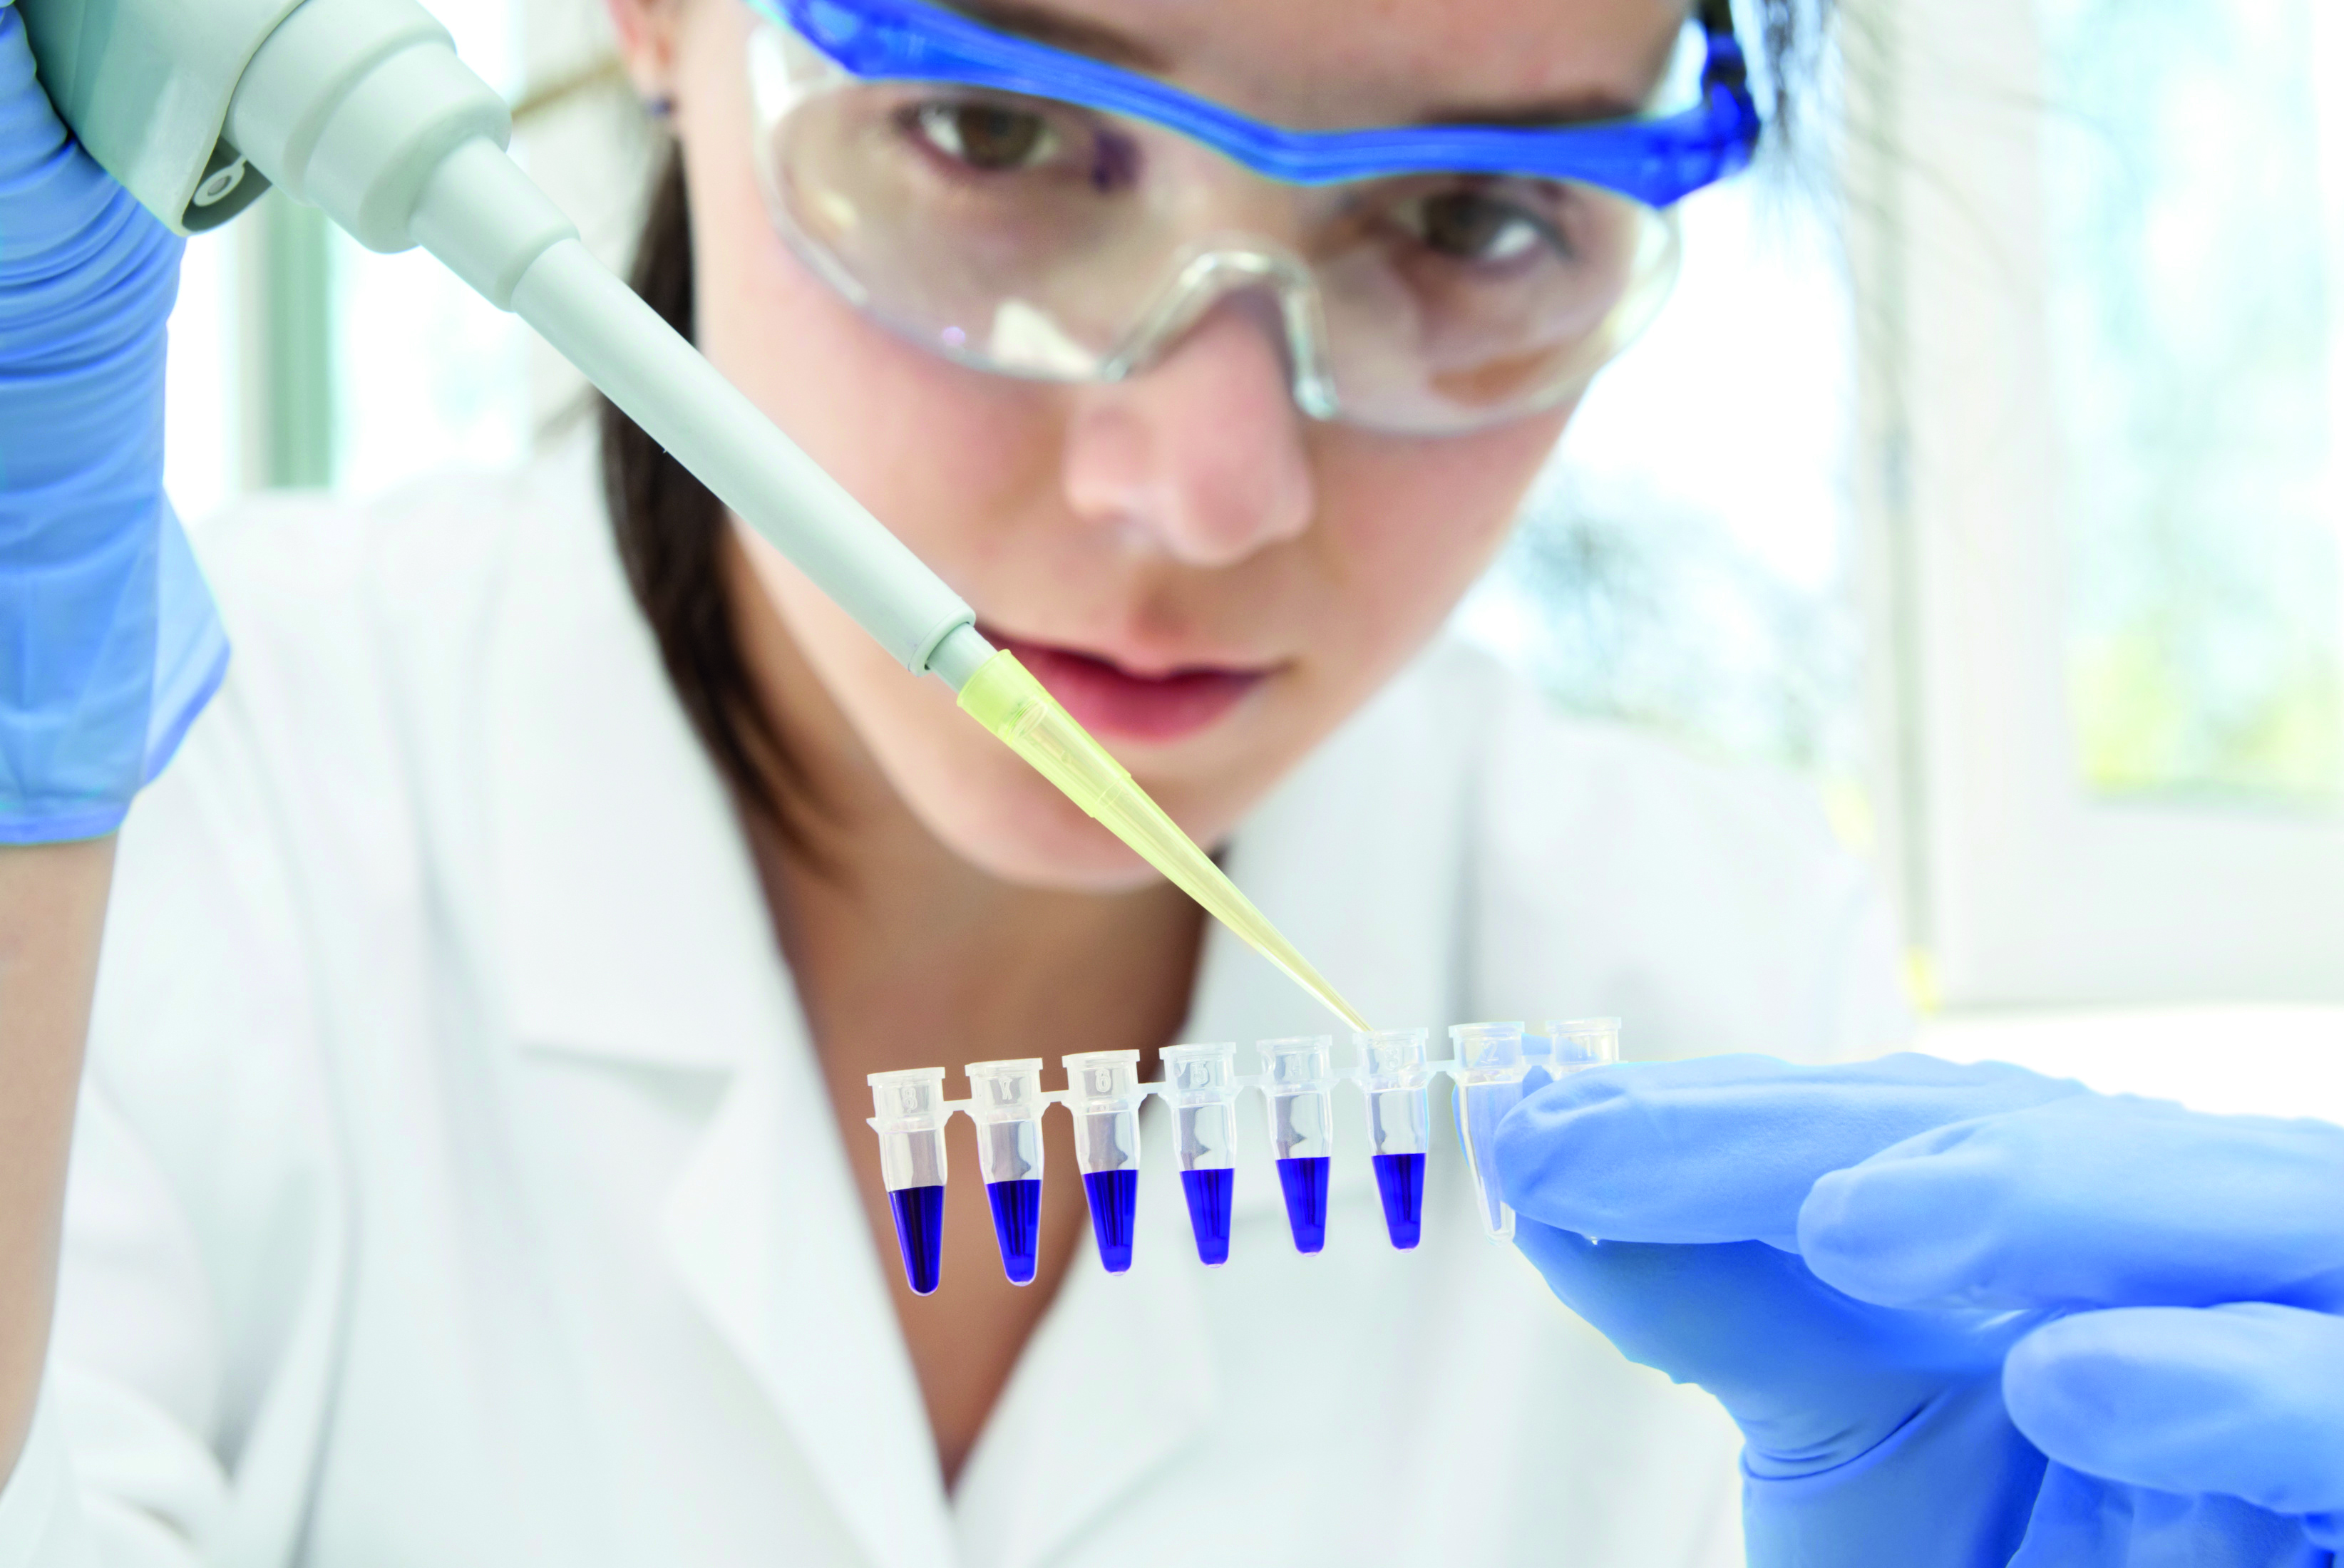 The photo shows a woman pipetting liquds. Photo stands for the analytical services provided by the presented company.